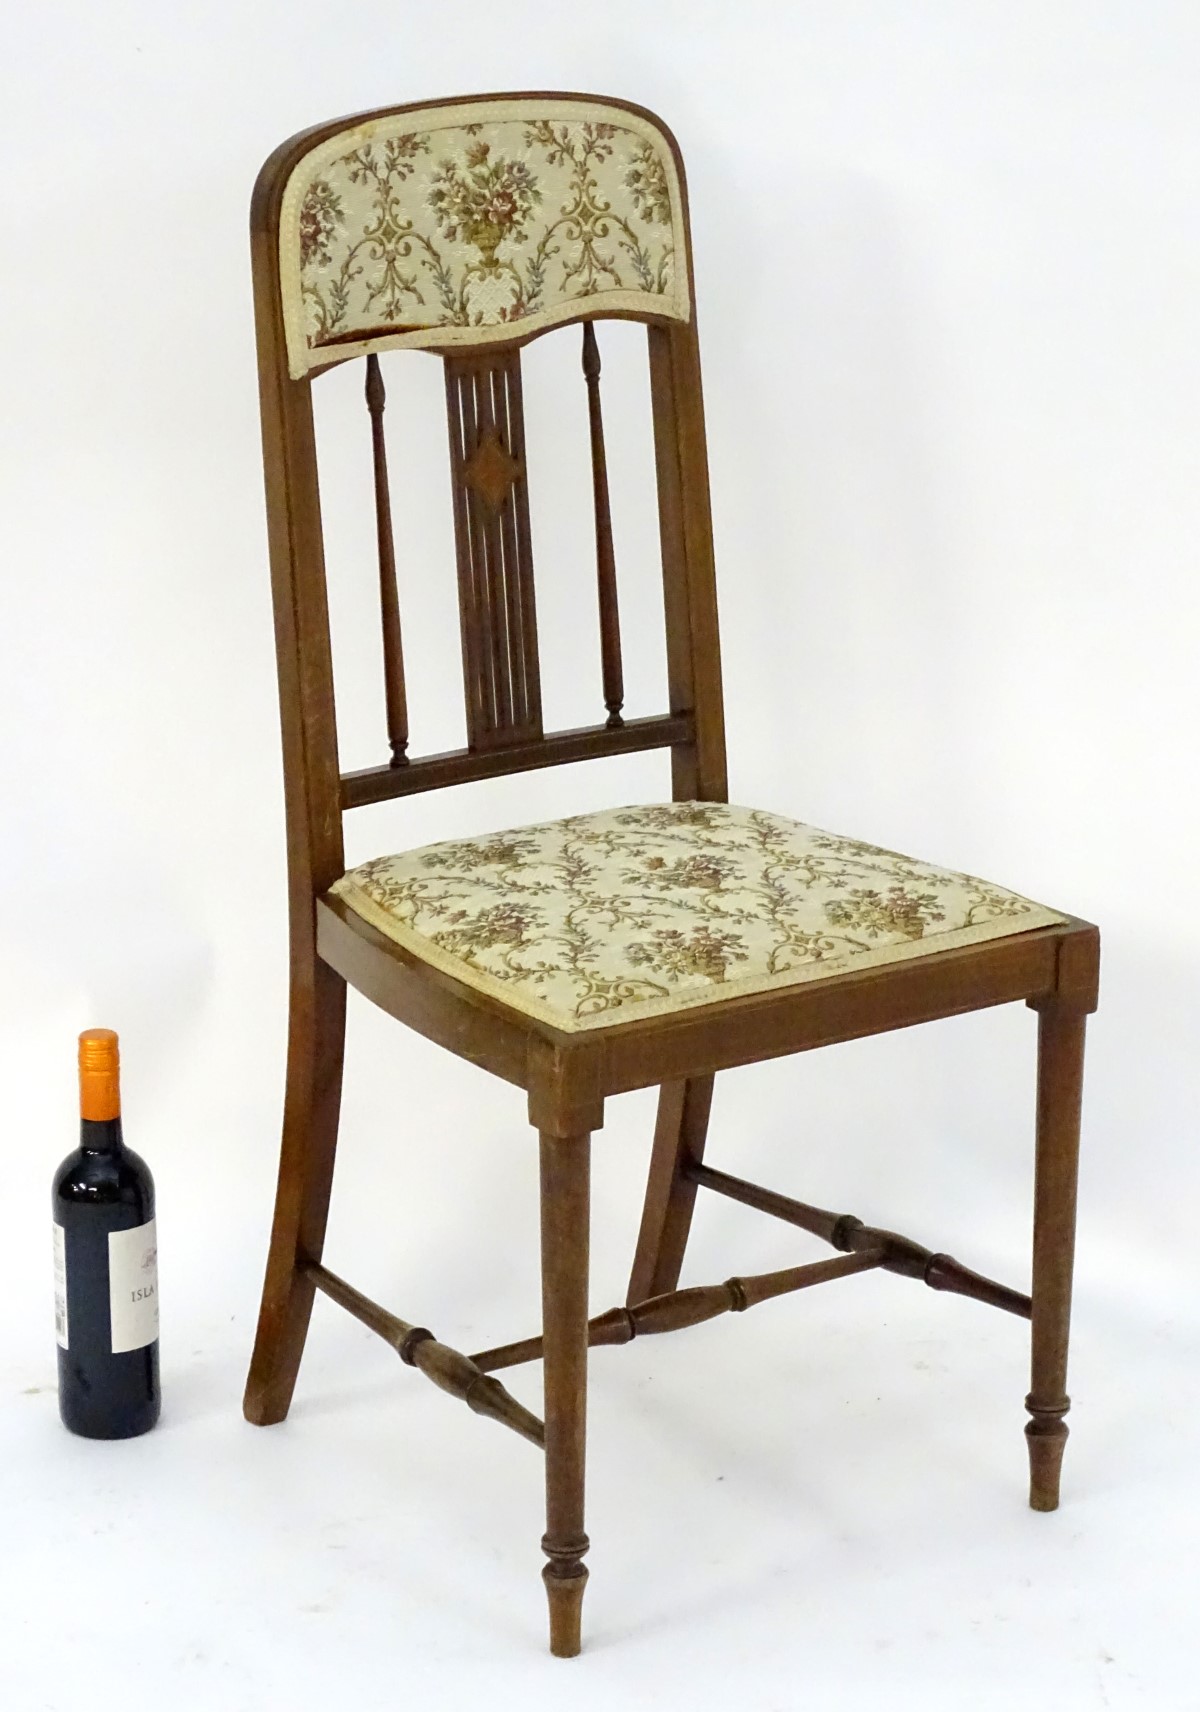 An early 20thC mahogany bedroom chair with a slatted backrest and inlaid decoration, - Image 2 of 9